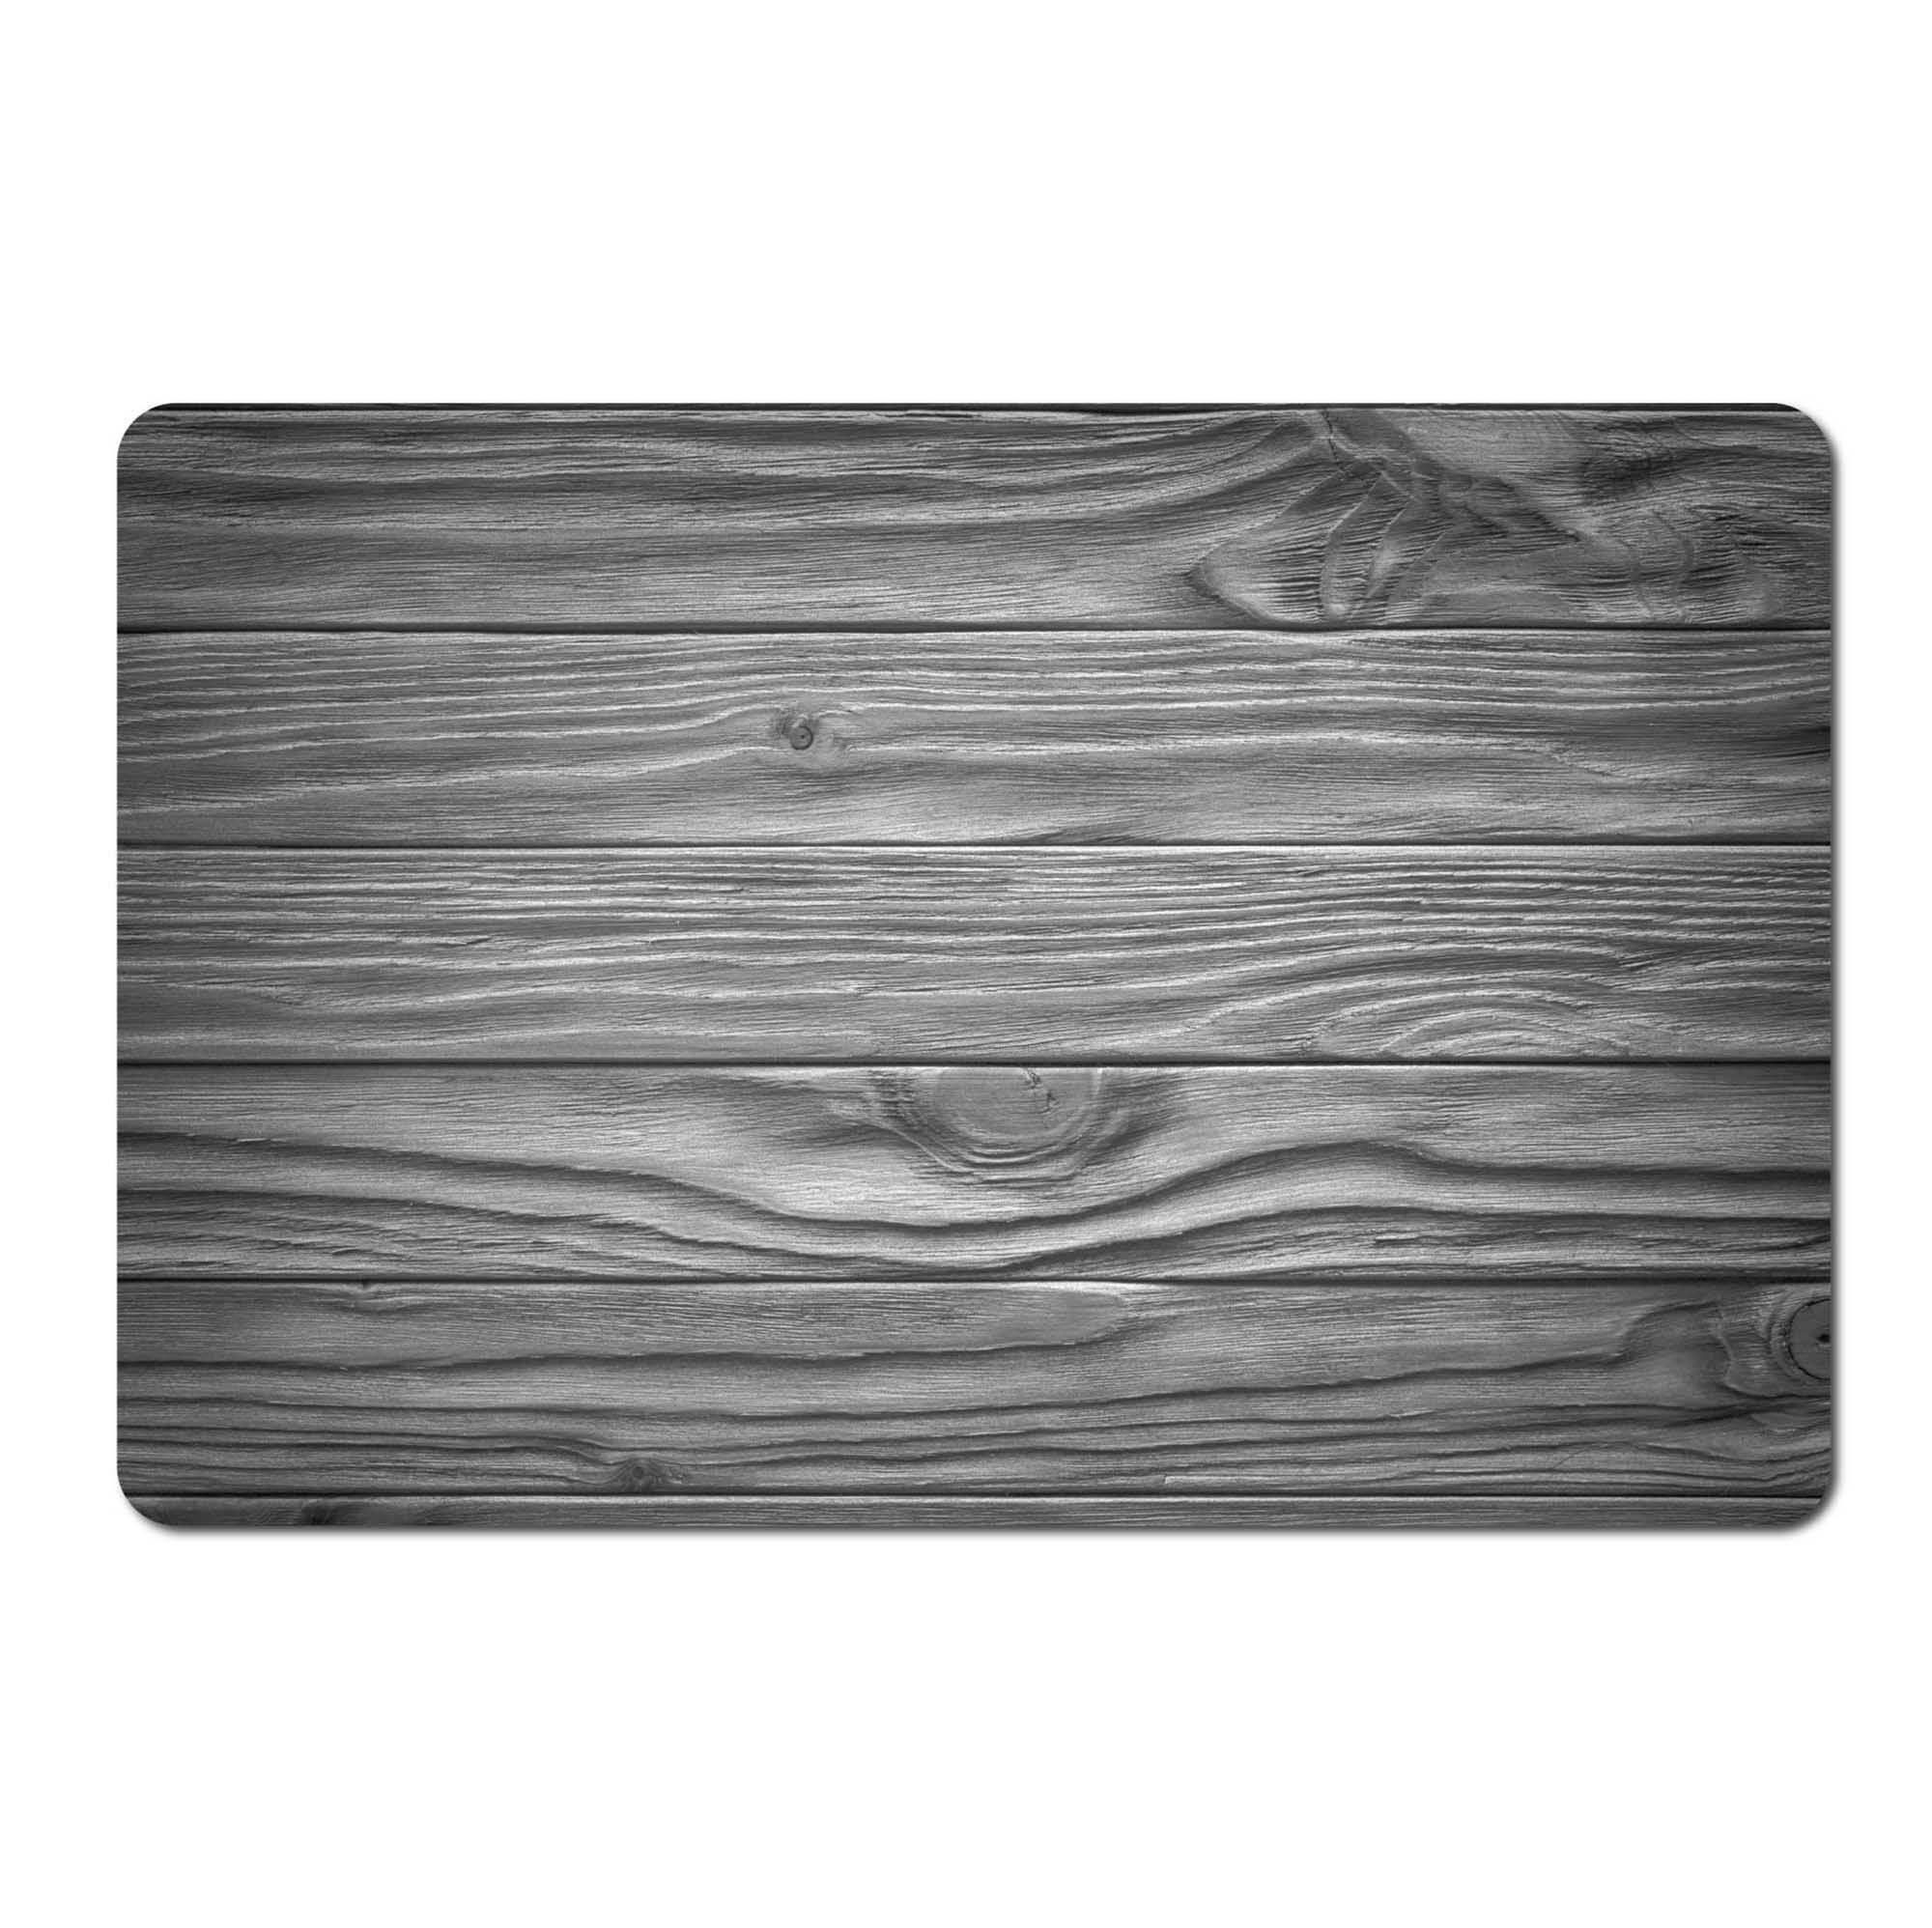 Wood Look Printed Grey Placemat 17x11.2in